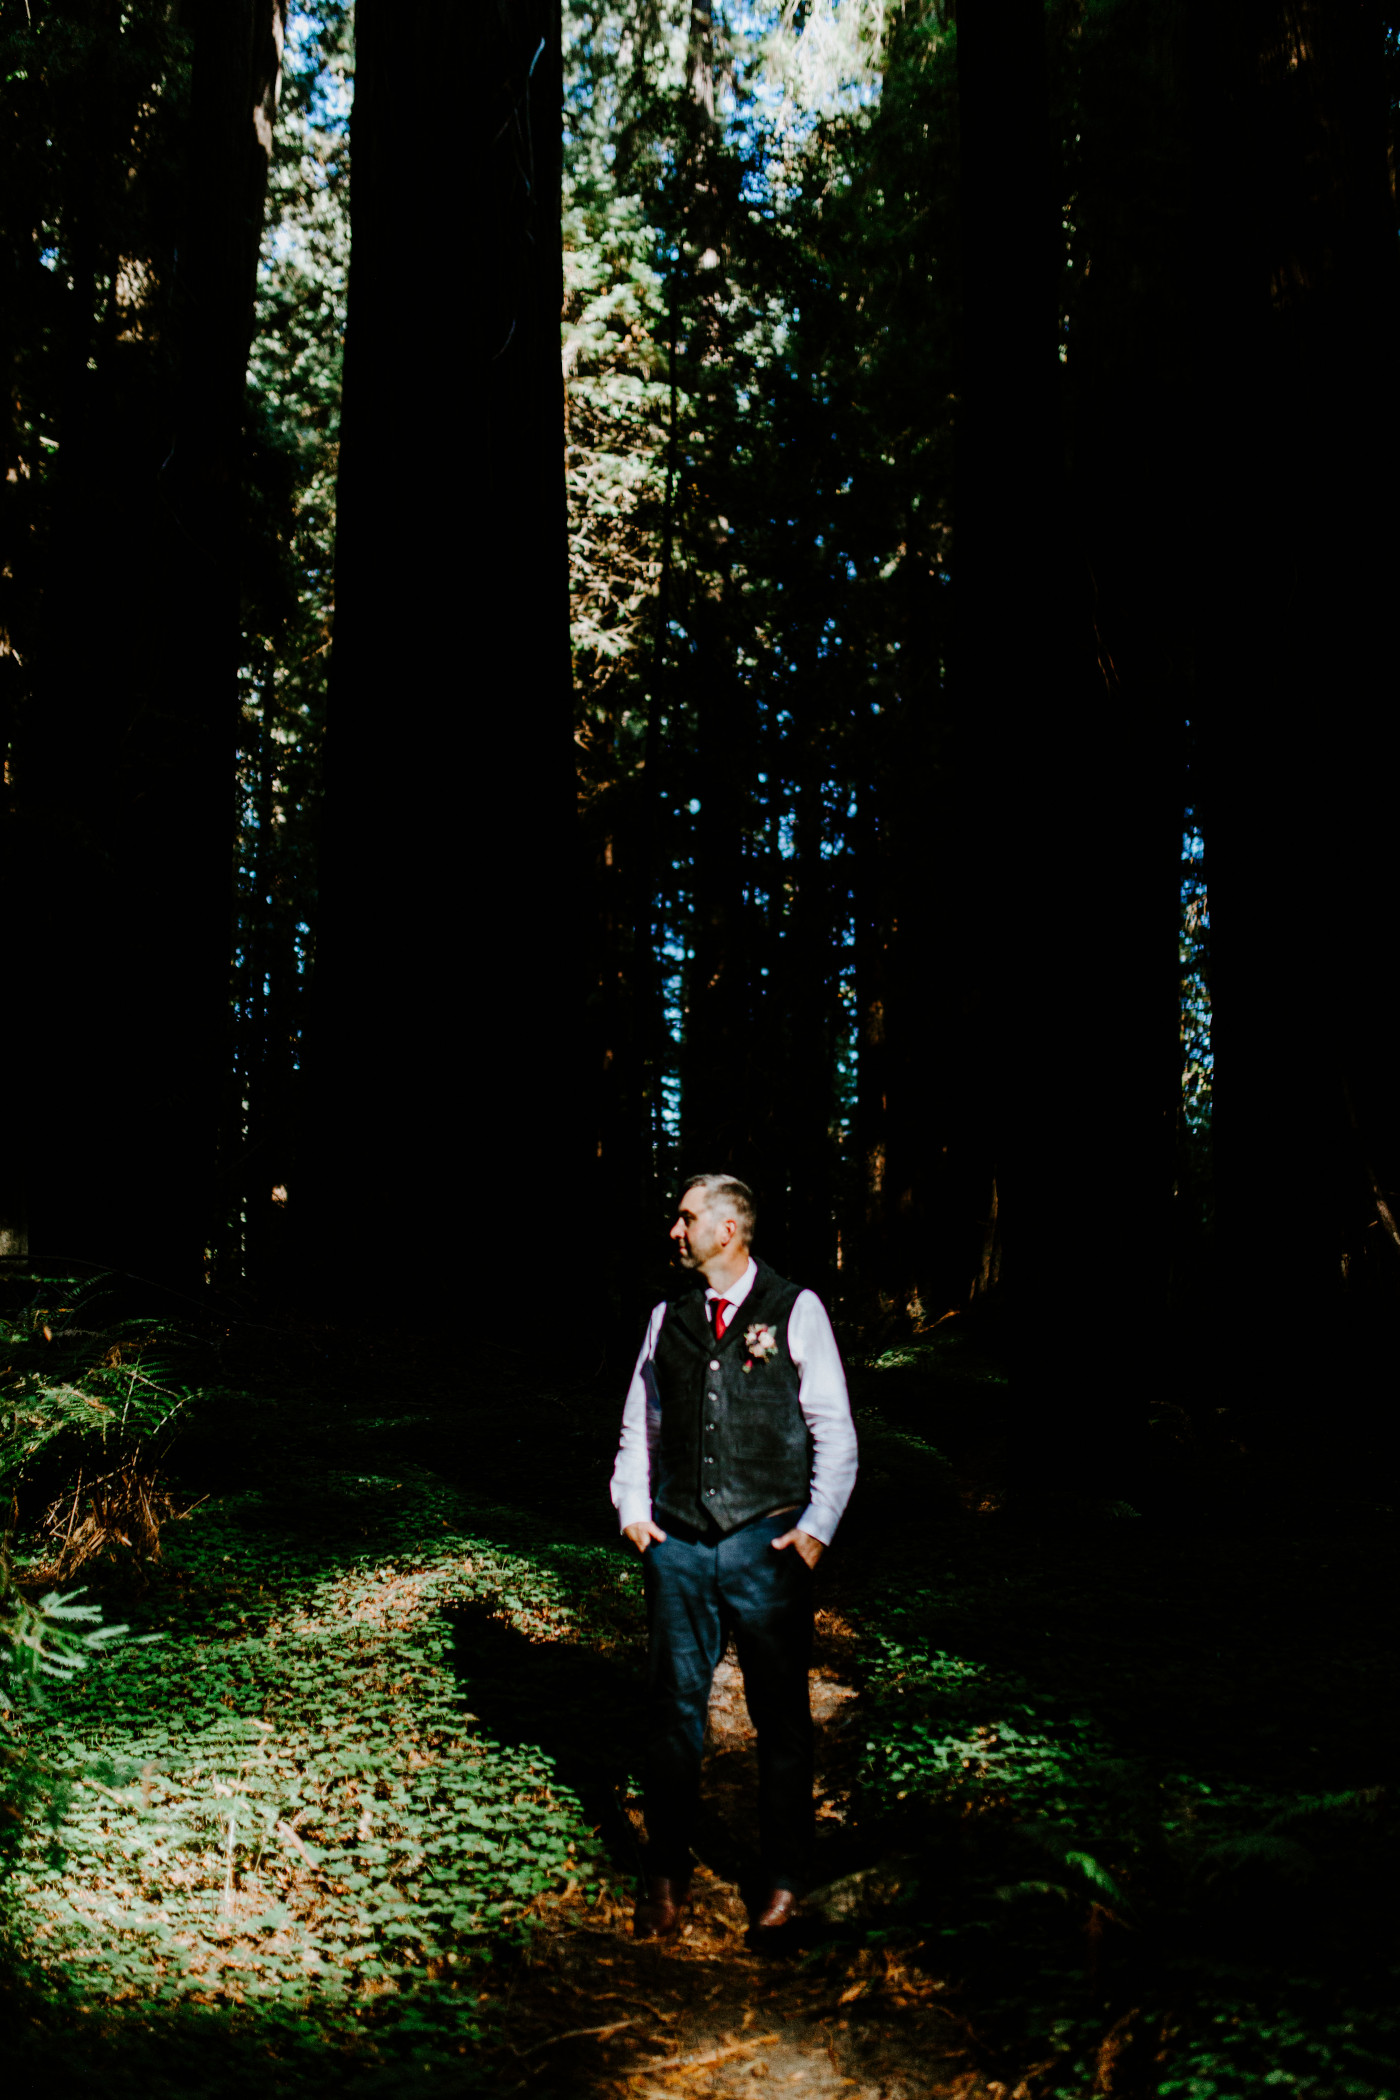 Tim stands in the California Redwoods in his wedding attire.